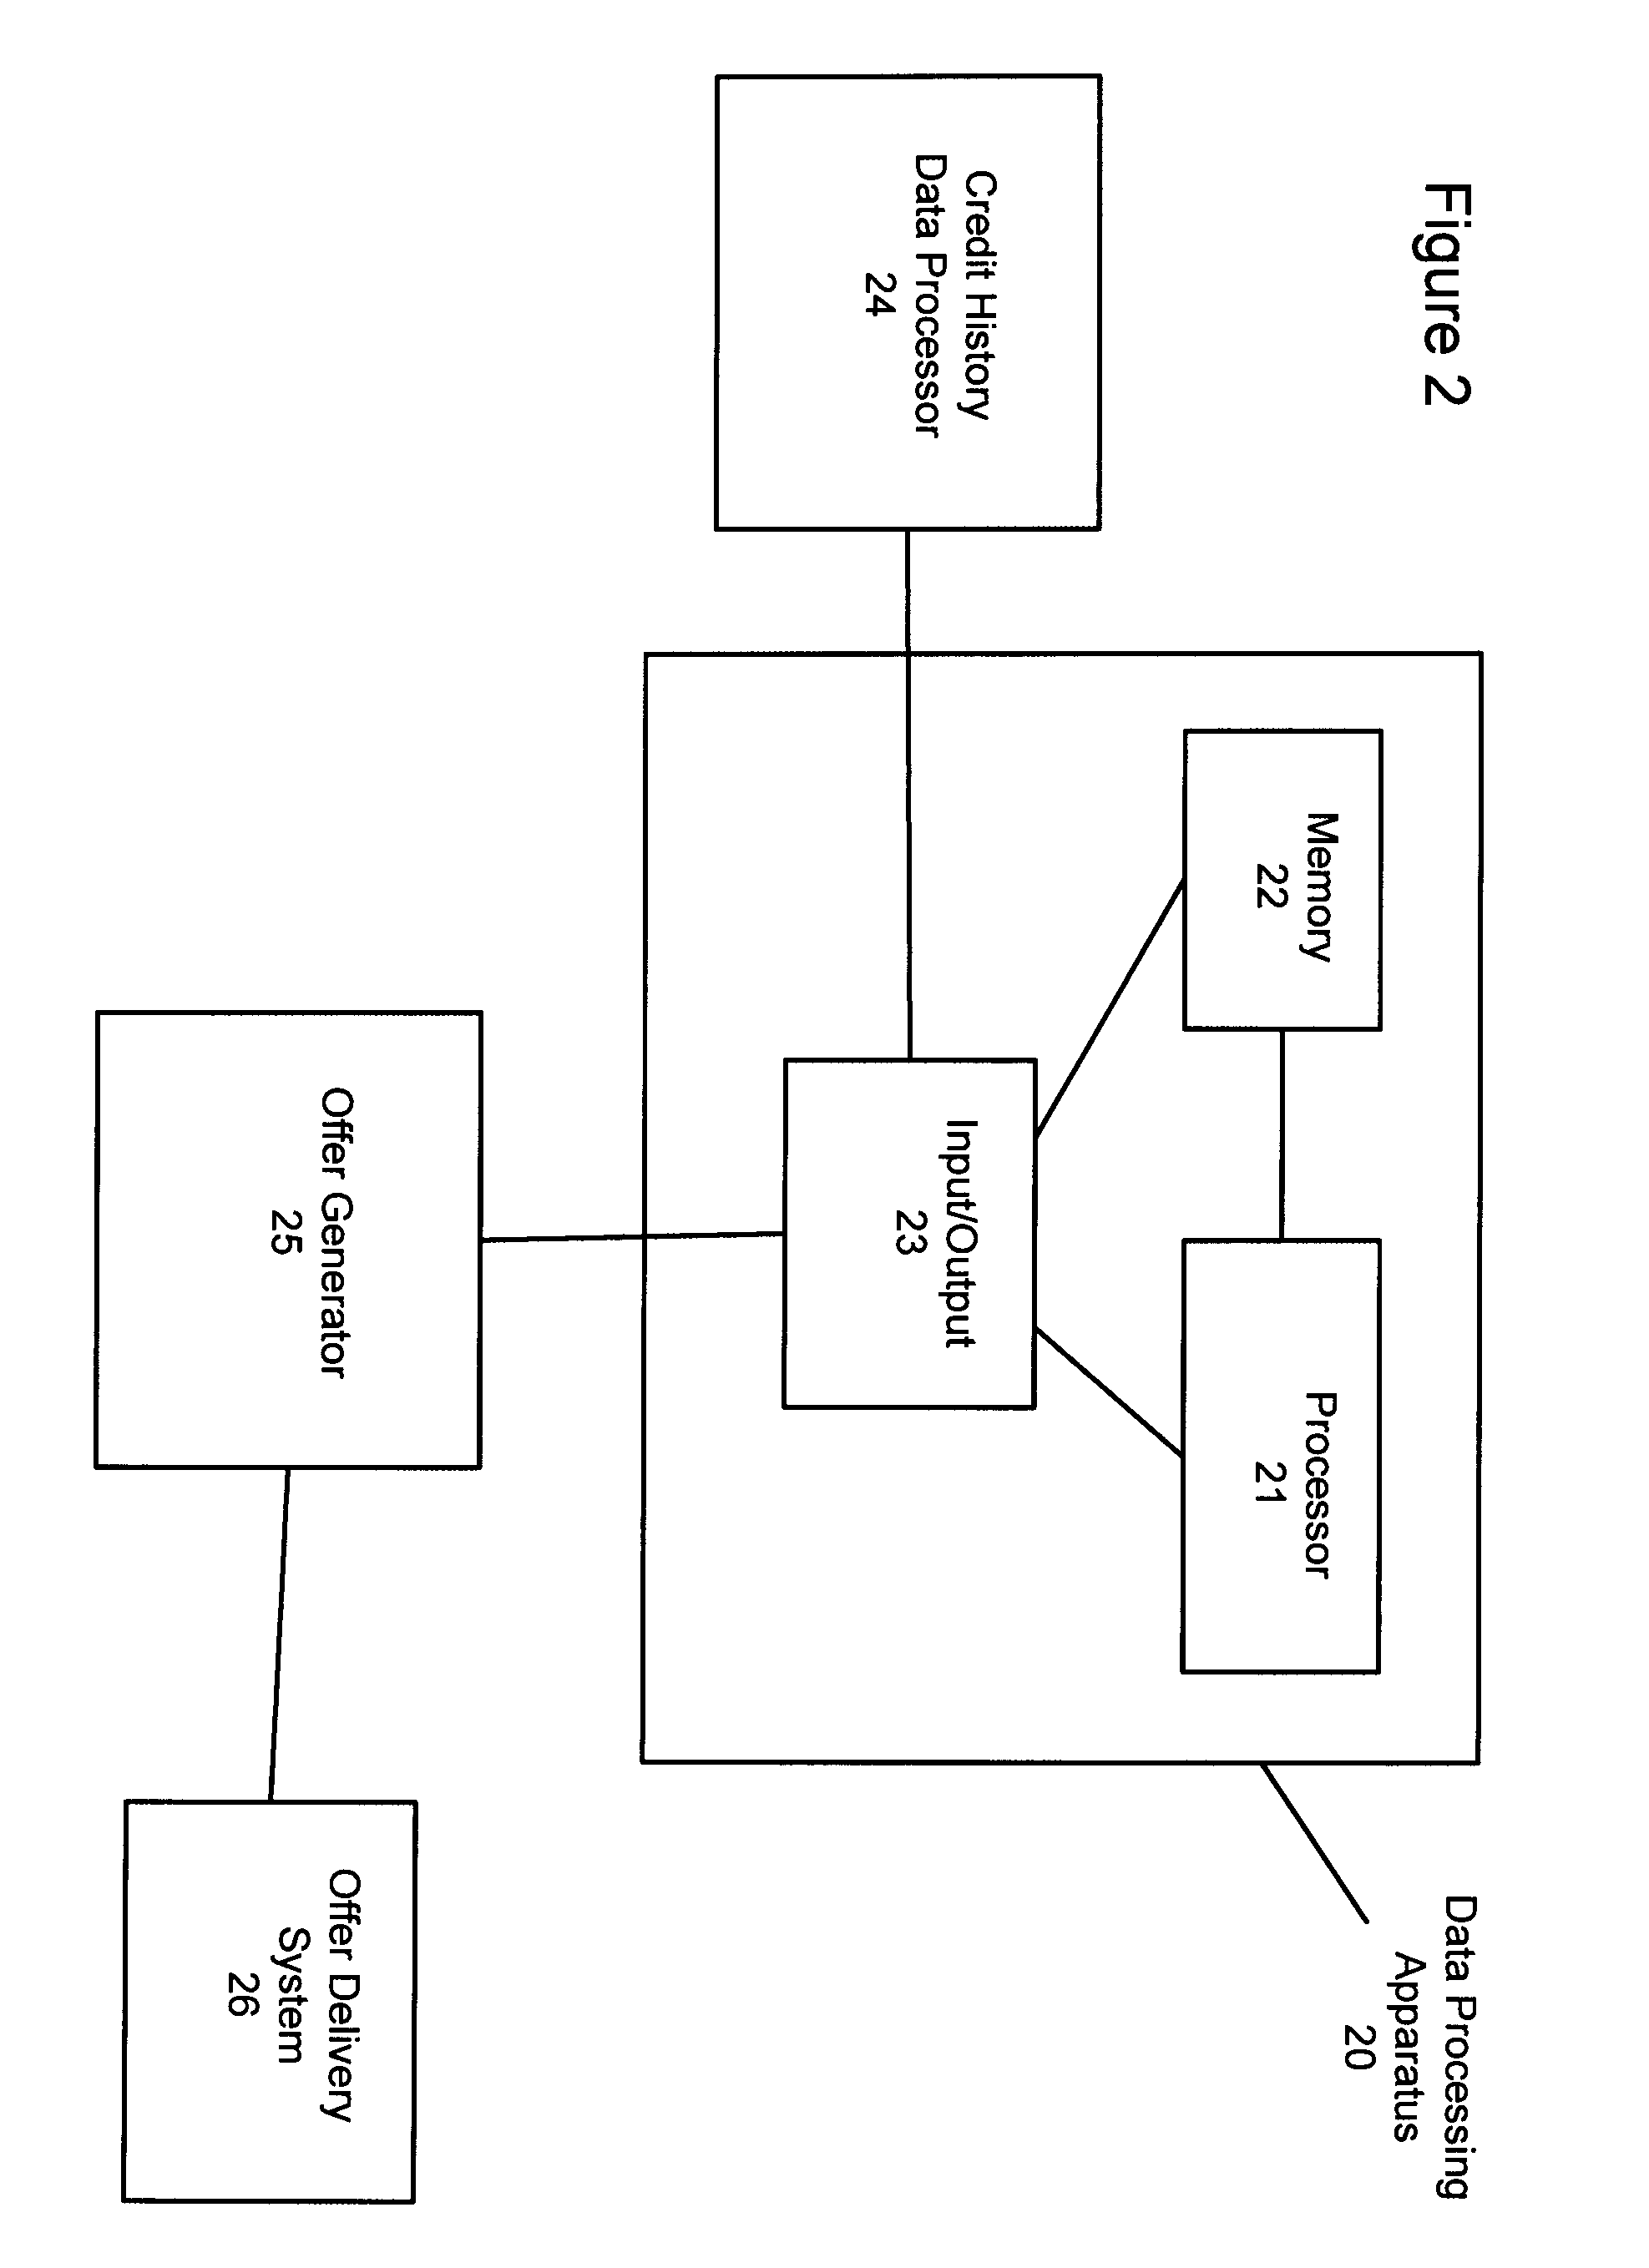 System and method for offering risk-based interest rates in a credit instrument